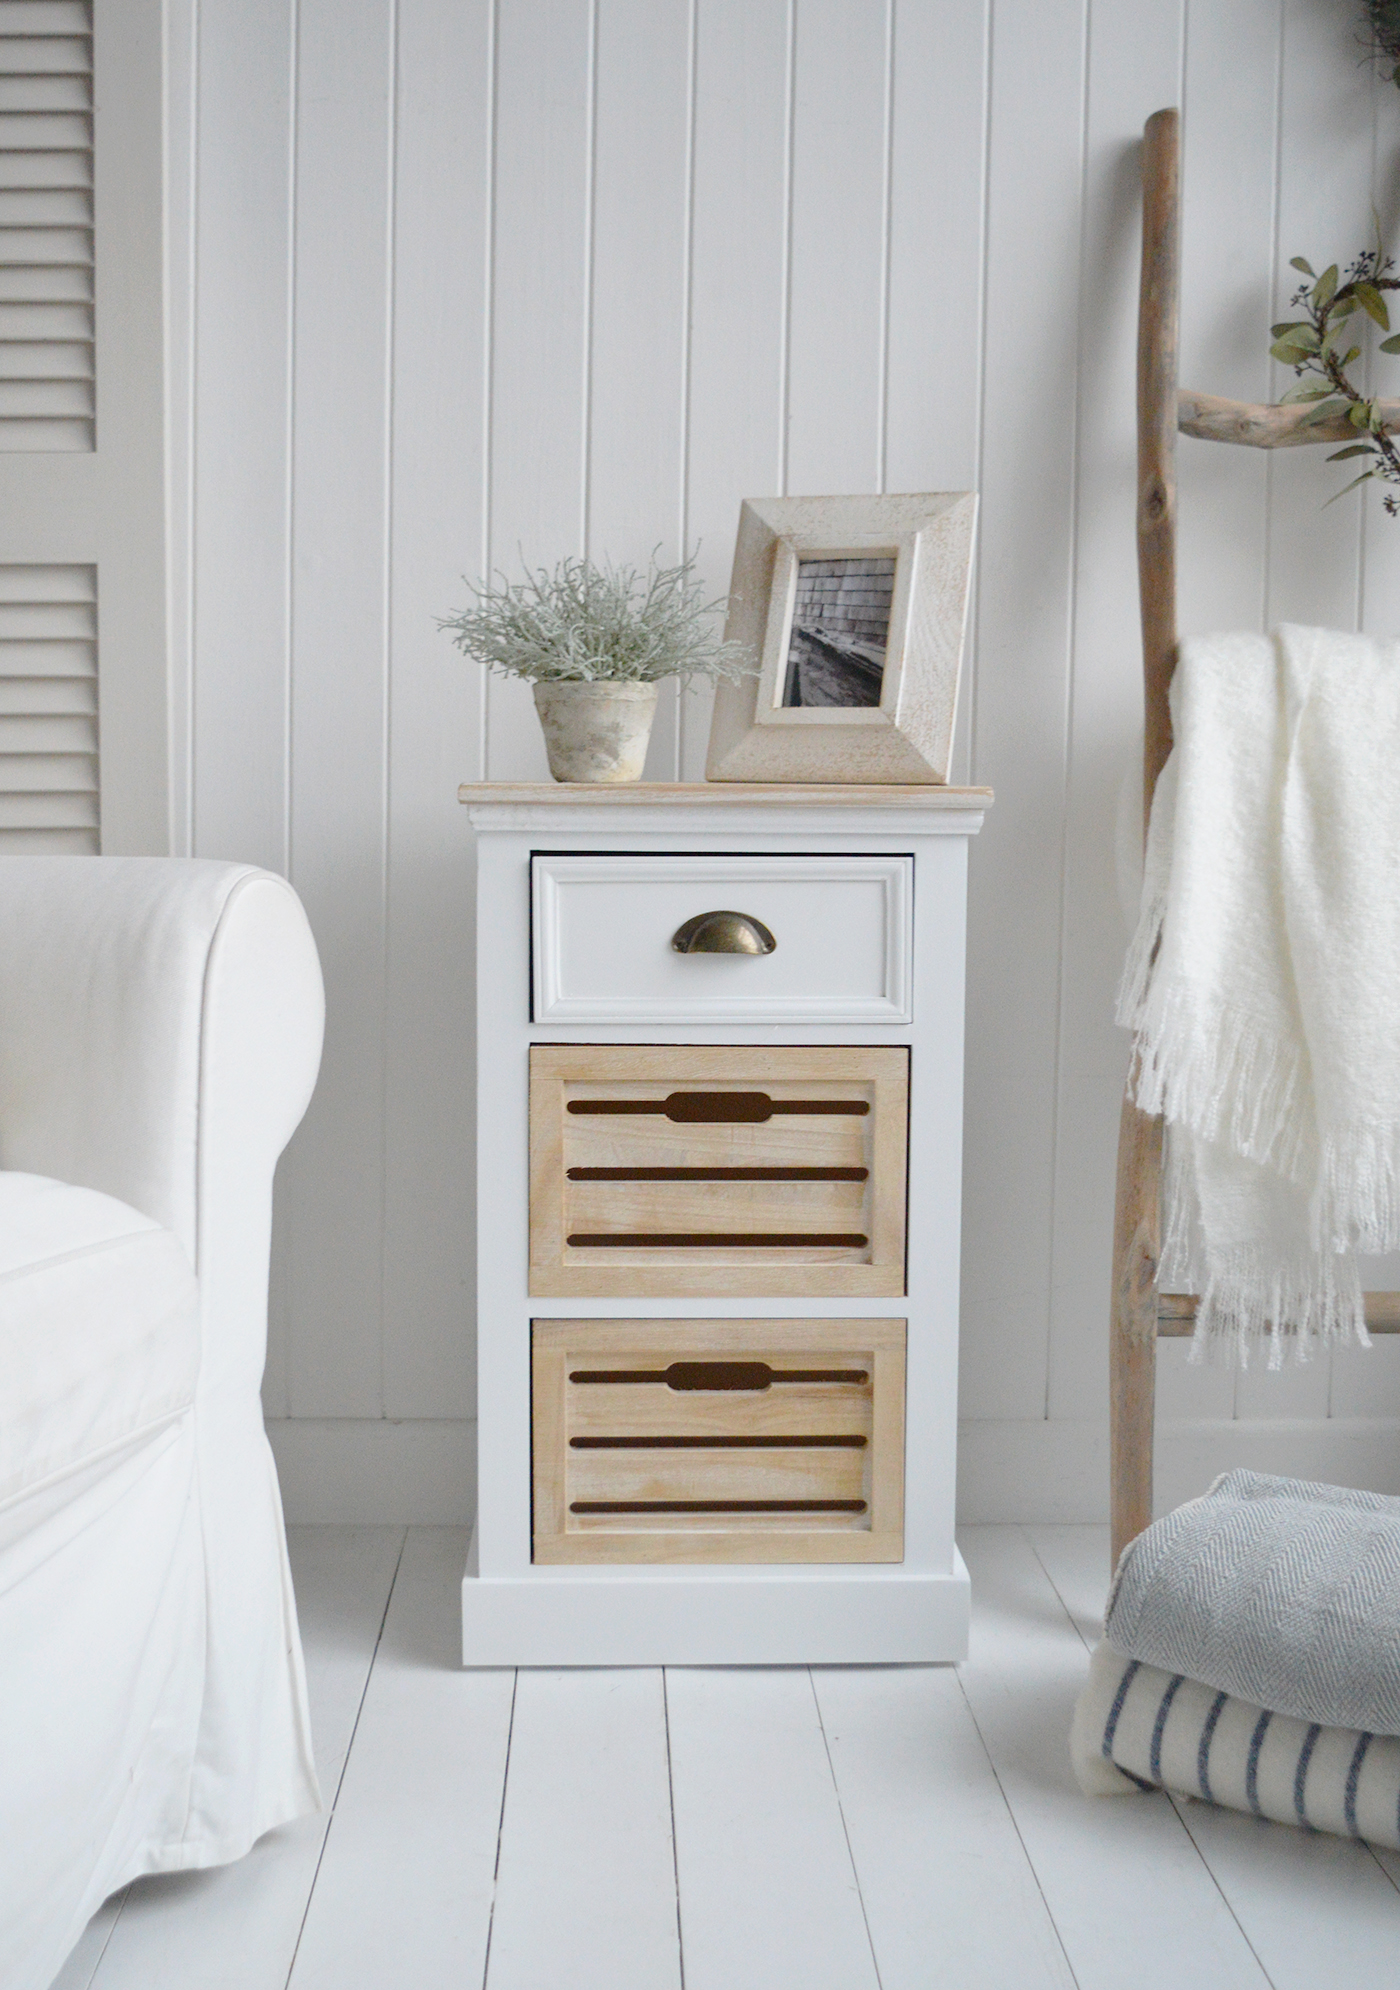 The white Southport cabinet as a lamp table with drawers for storage in a modern country farmhouse home